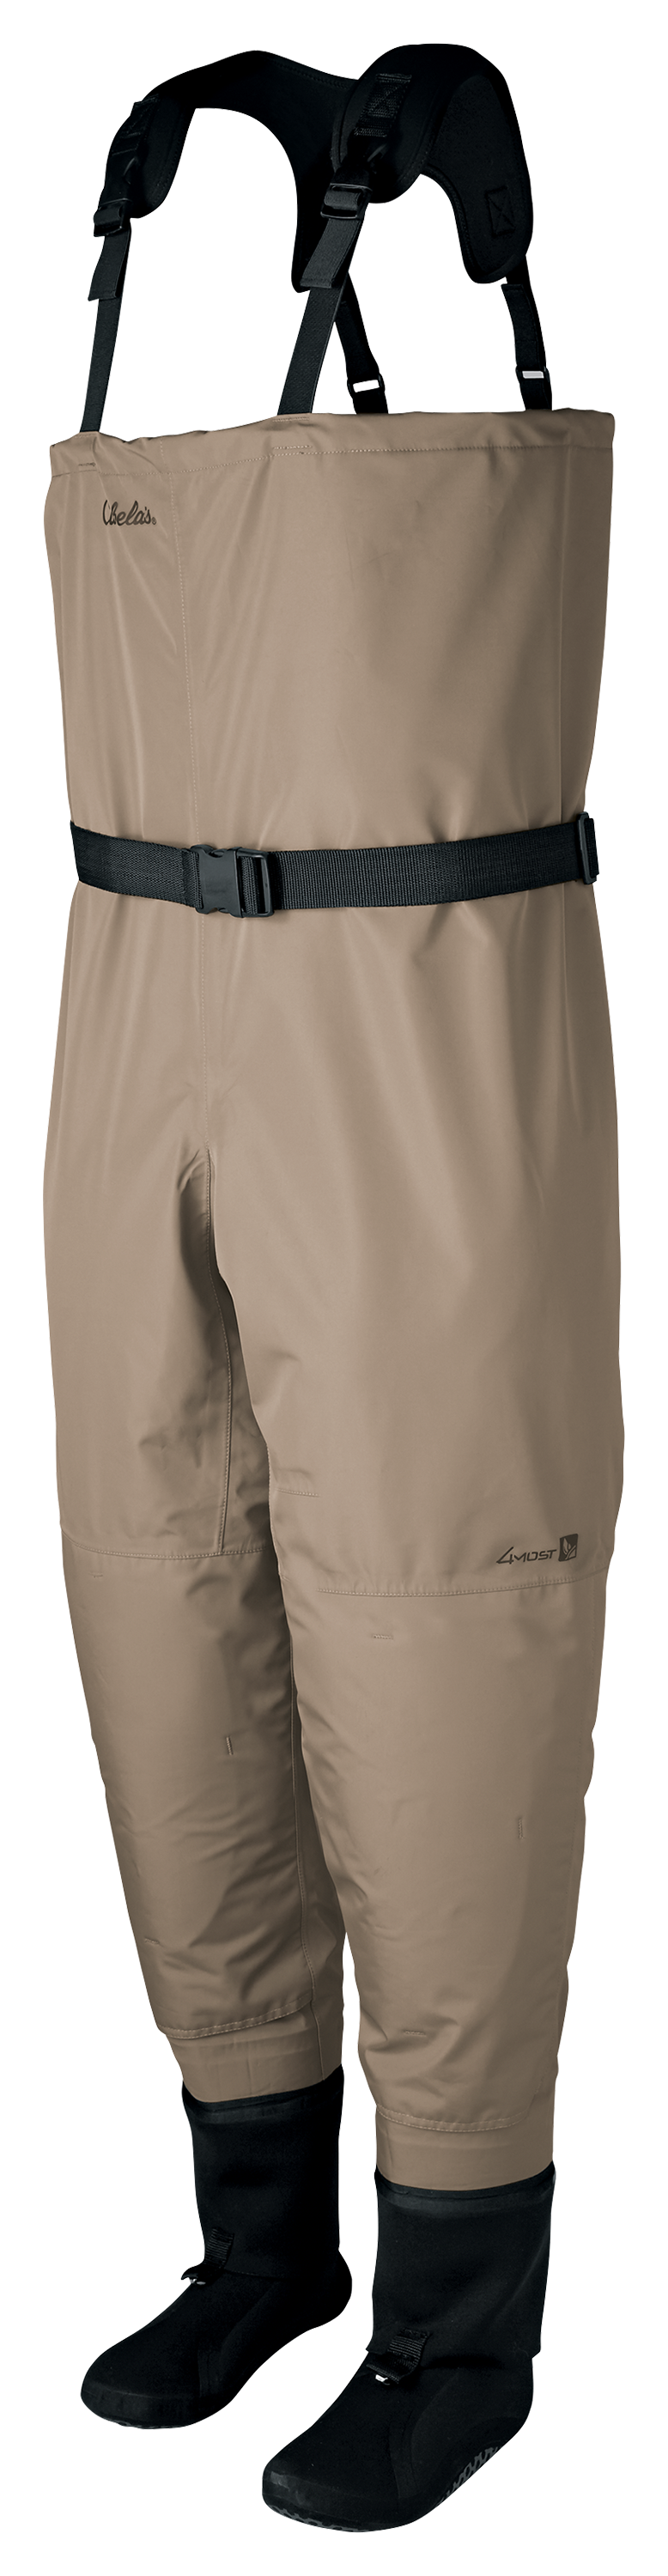 Cabela's Premium Breathable Stocking-Foot Fishing Waders for Men - Tan - Large Tall